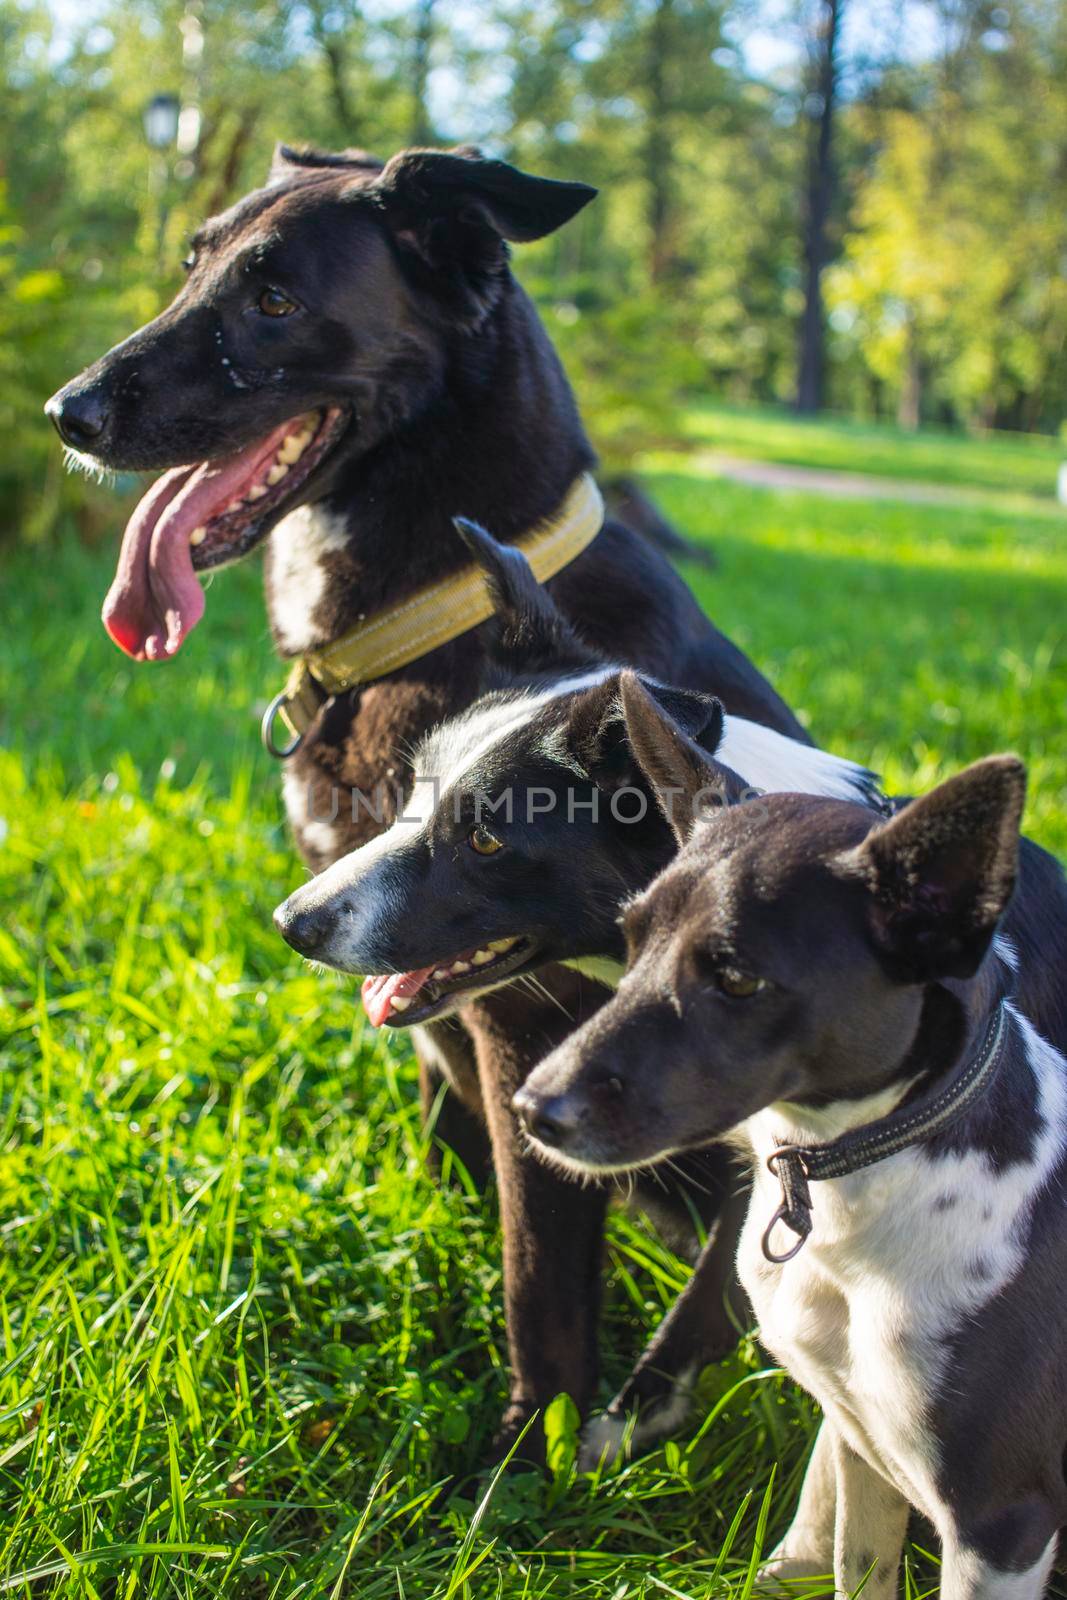 head shot of three white and black dogs of blurry green background. Side profile view. Group side view portrait of dog of different breeds